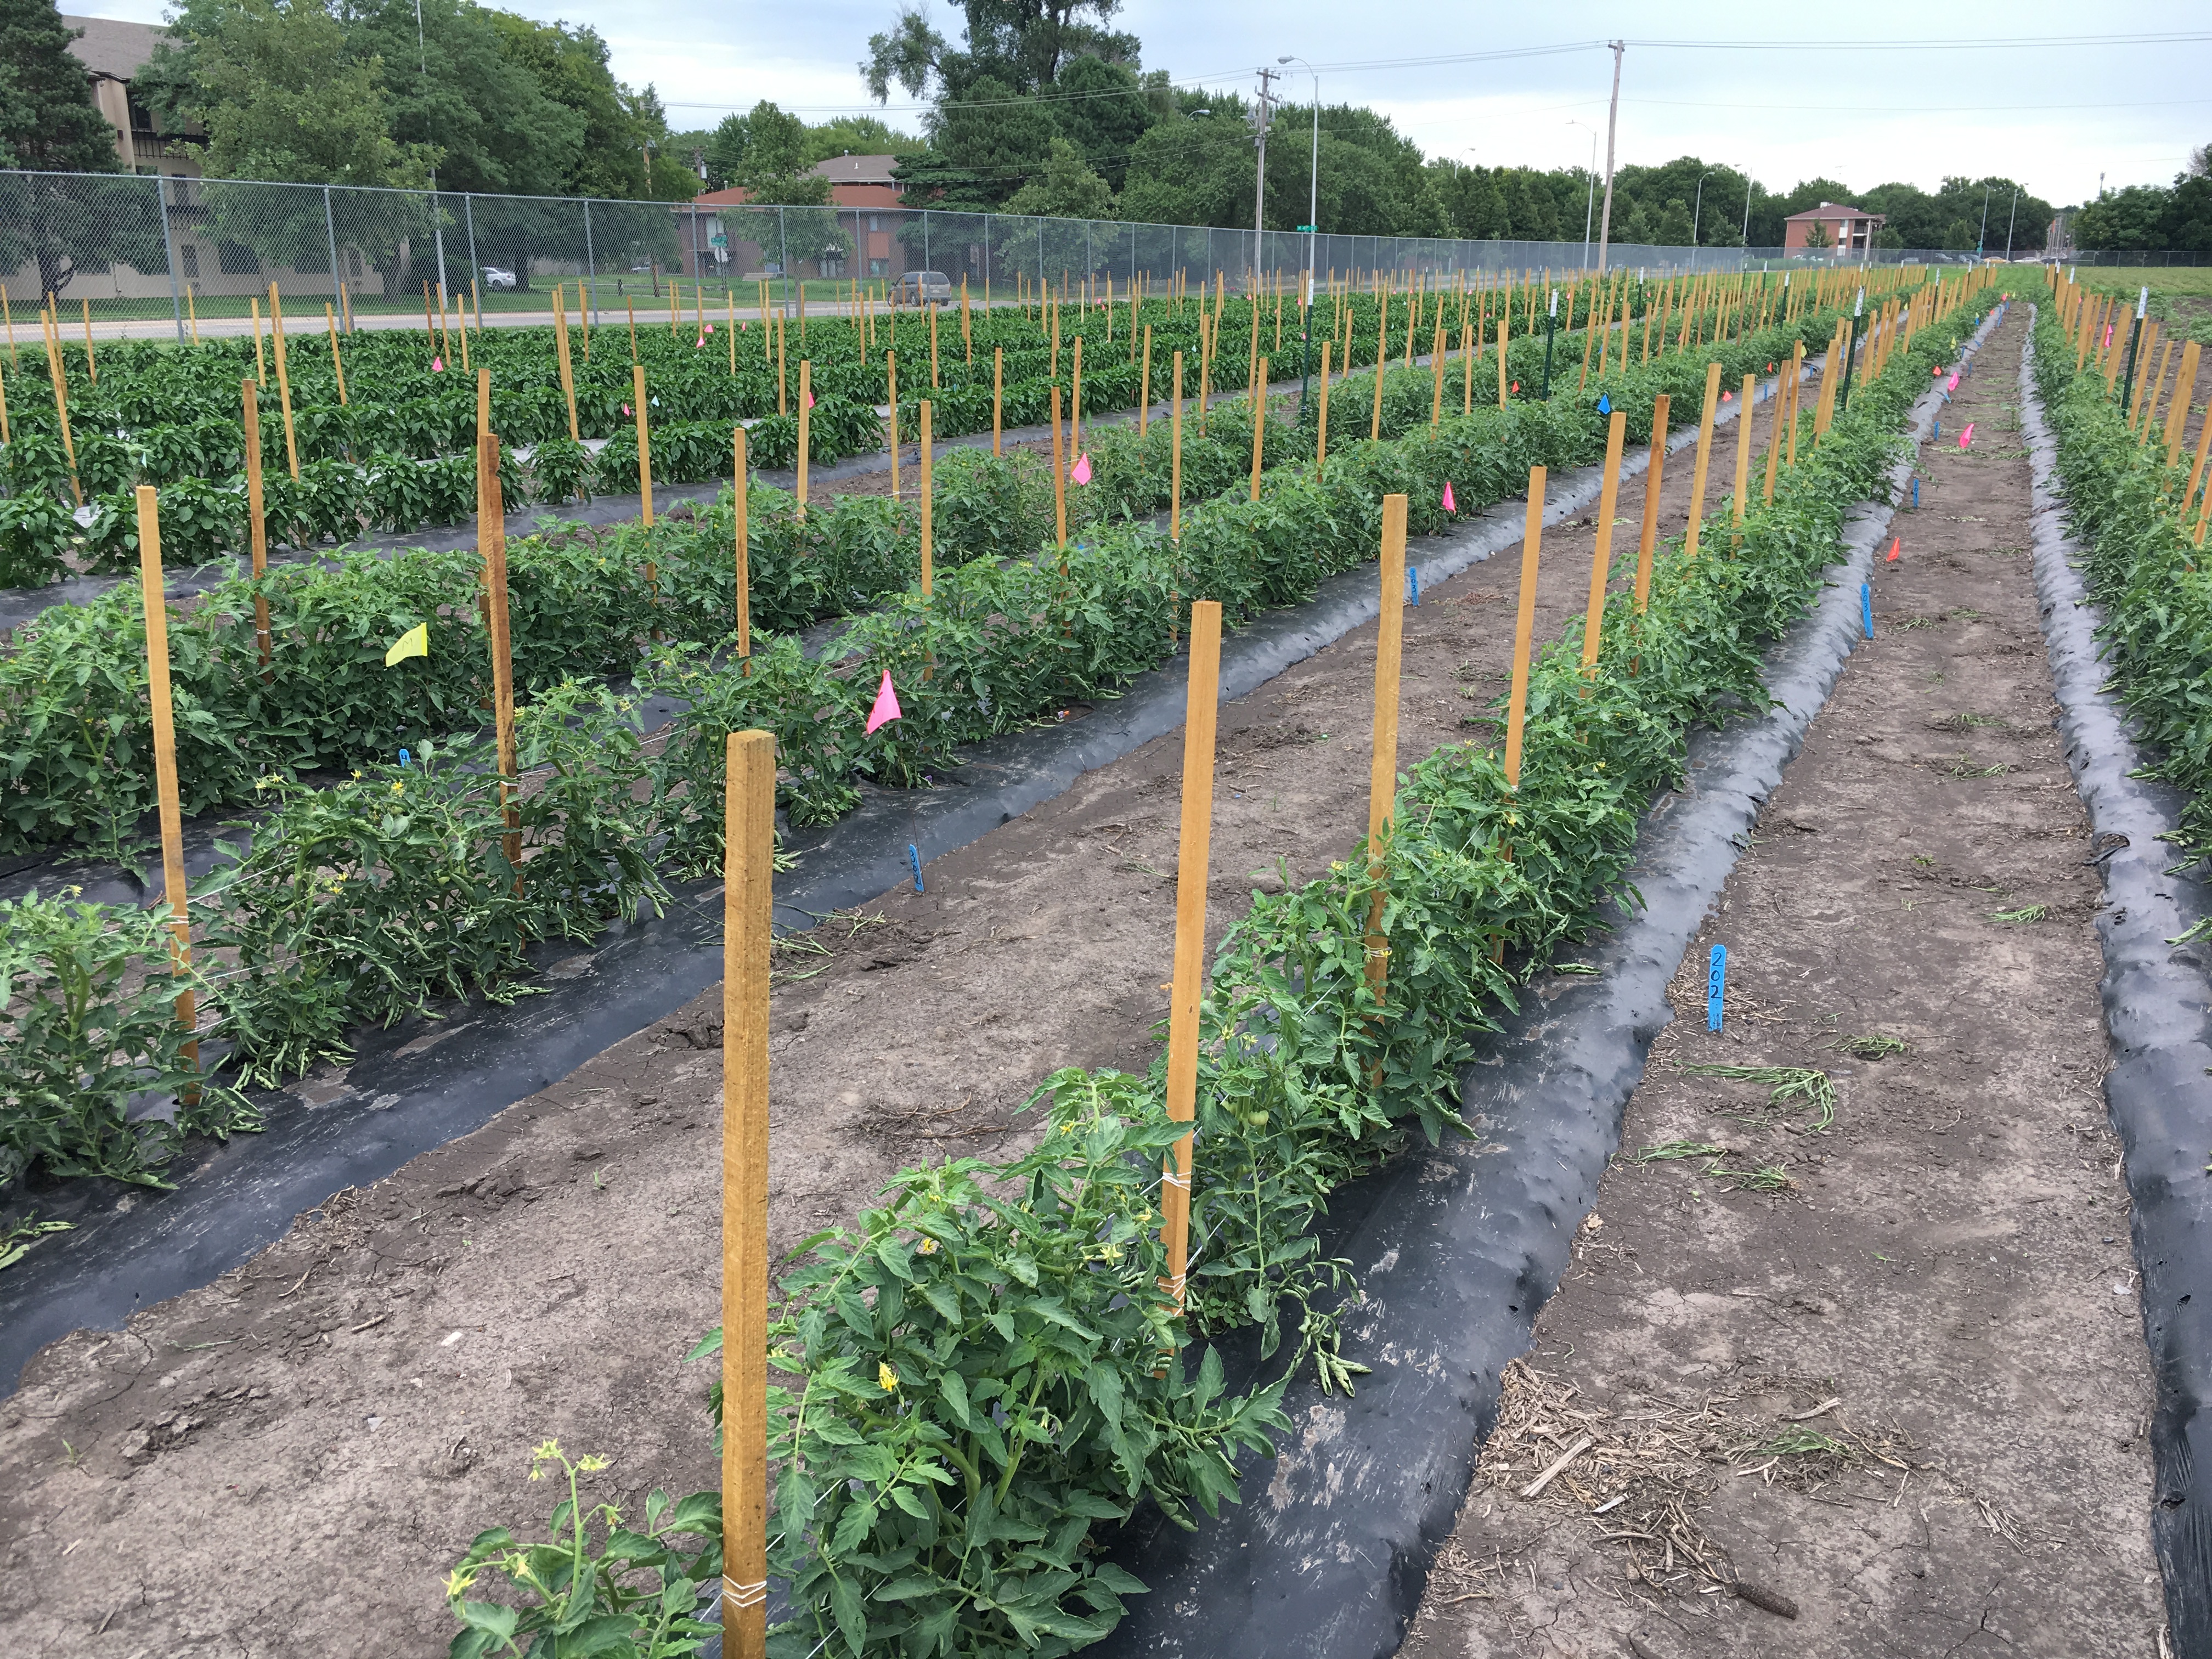 An example of bioplastic film in tomato and pepper plantings at the University of Nebraska-Lincoln's East Campus test plots. (Credit: Sam Wortman)